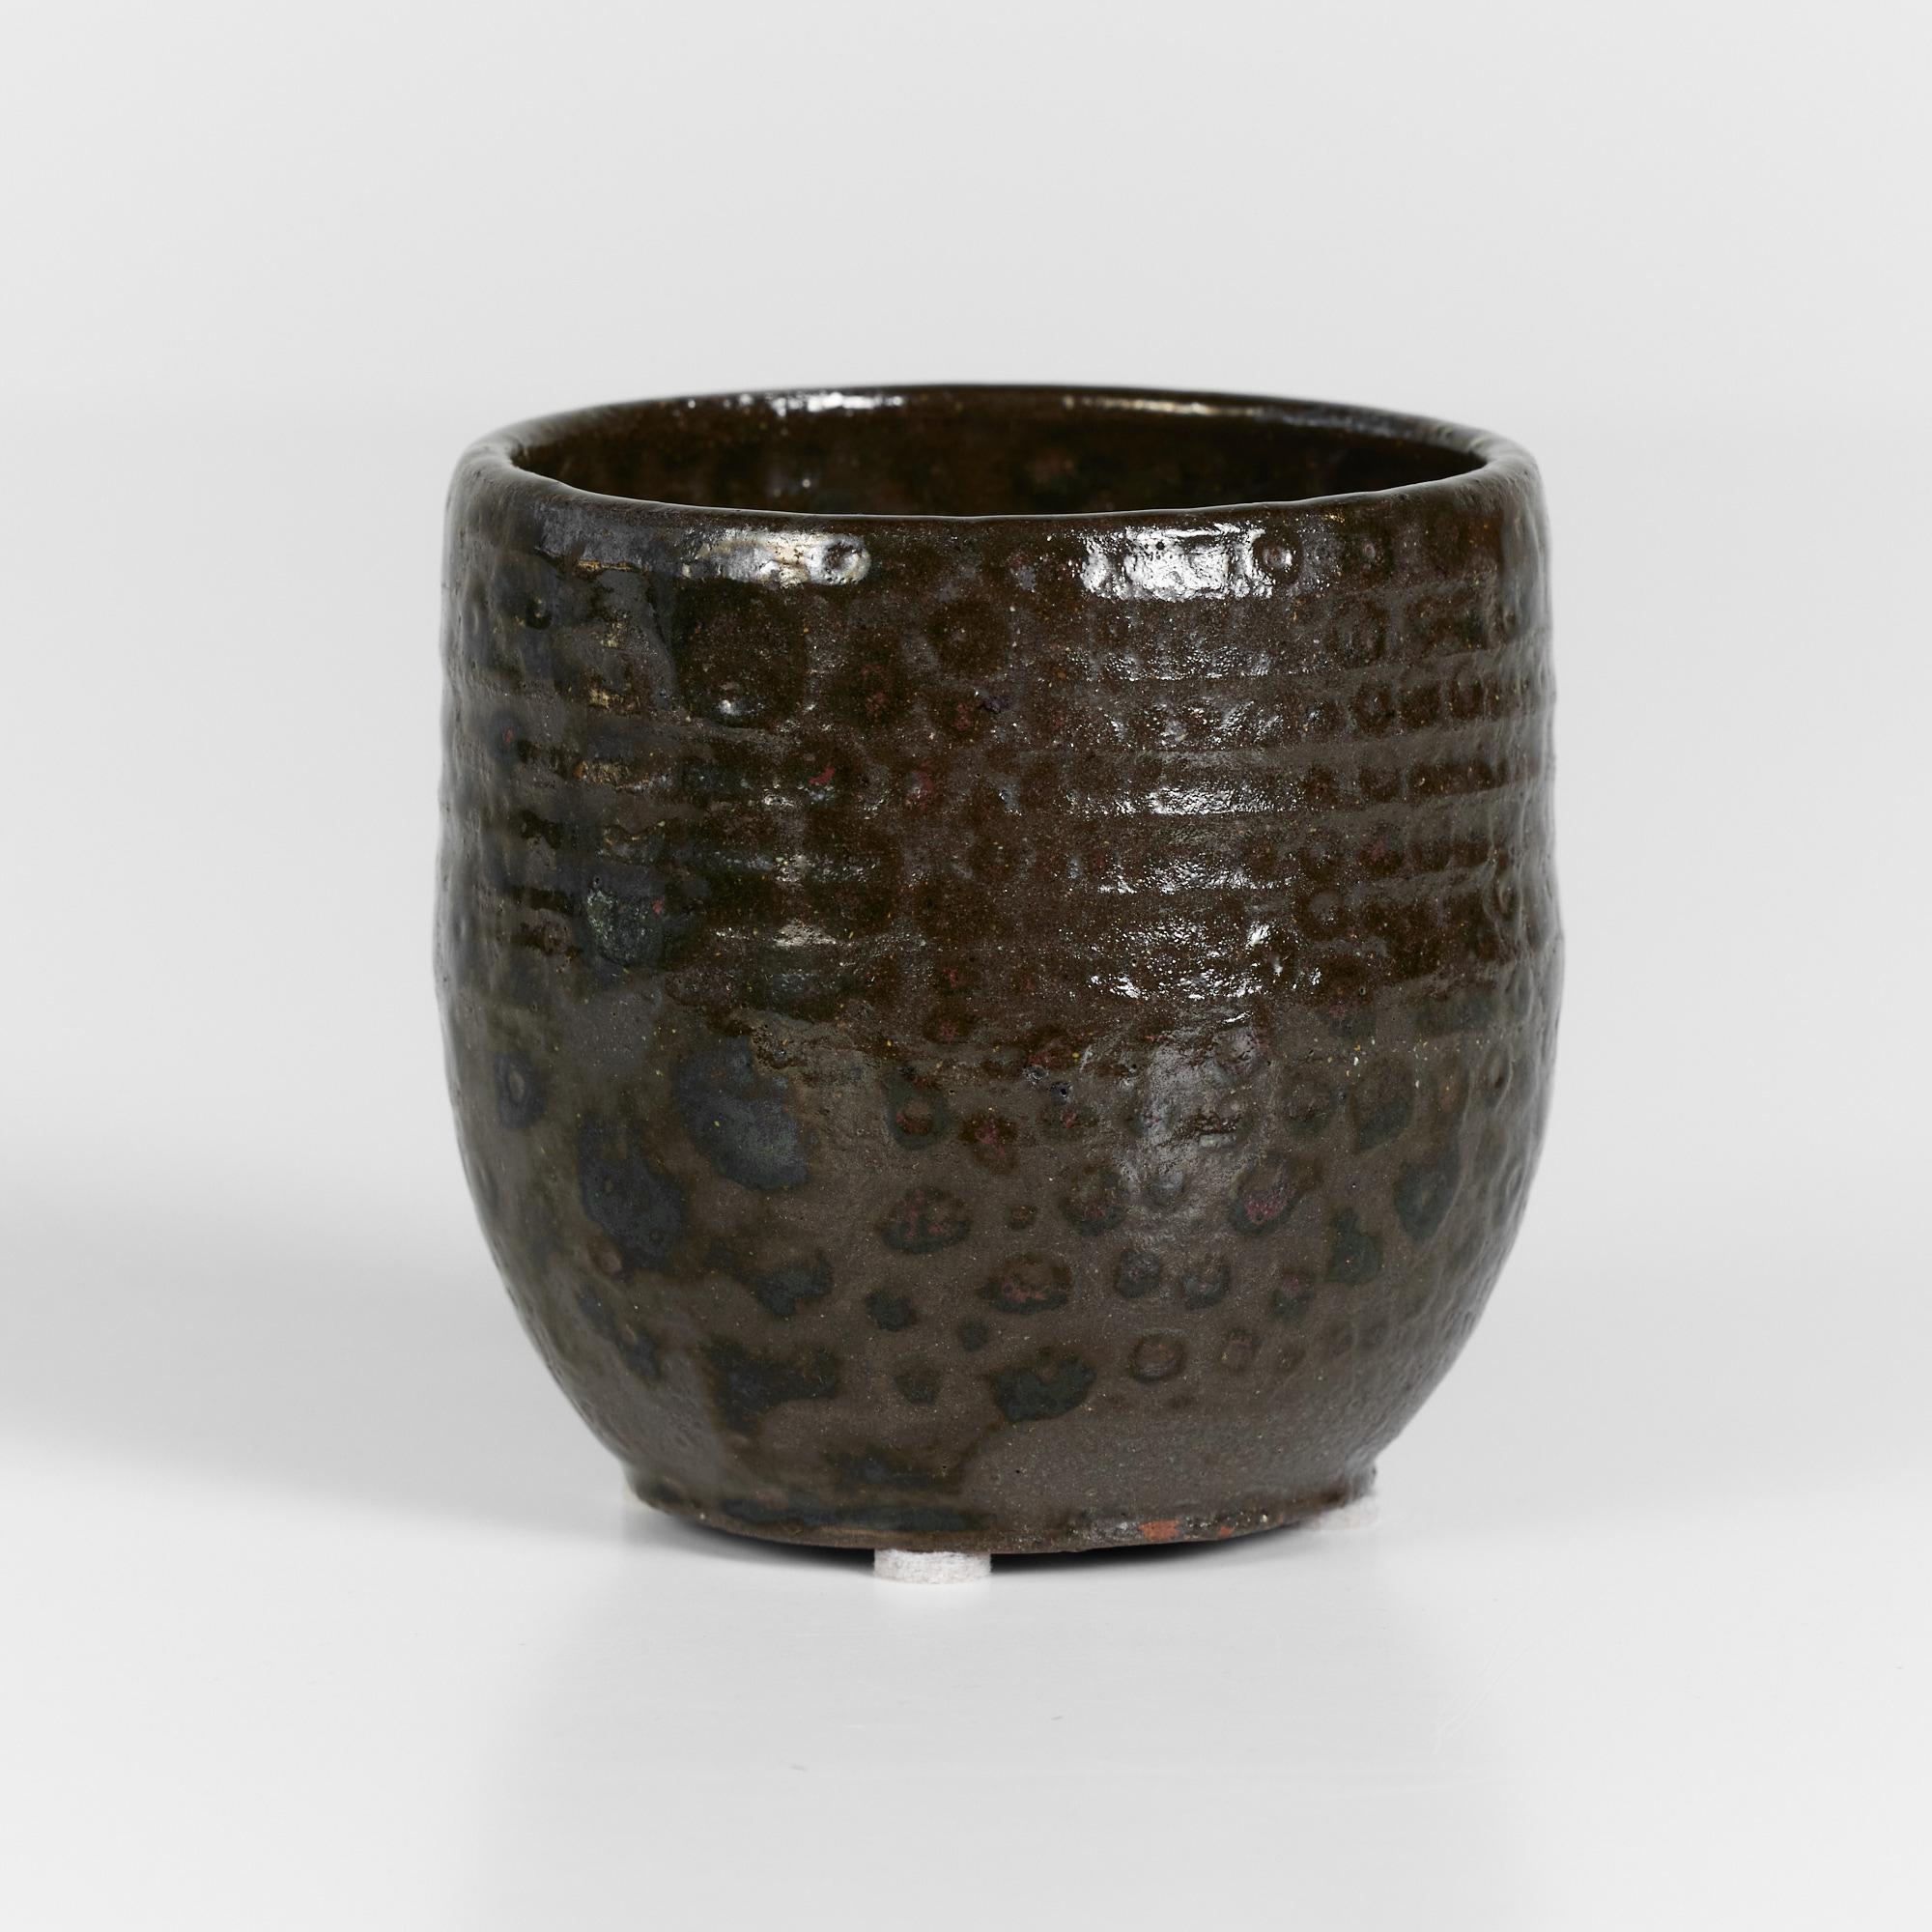 Ceramic piece perfect as a cup or decorative vessel. The exterior features an all over brown matte glaze with high gloss 